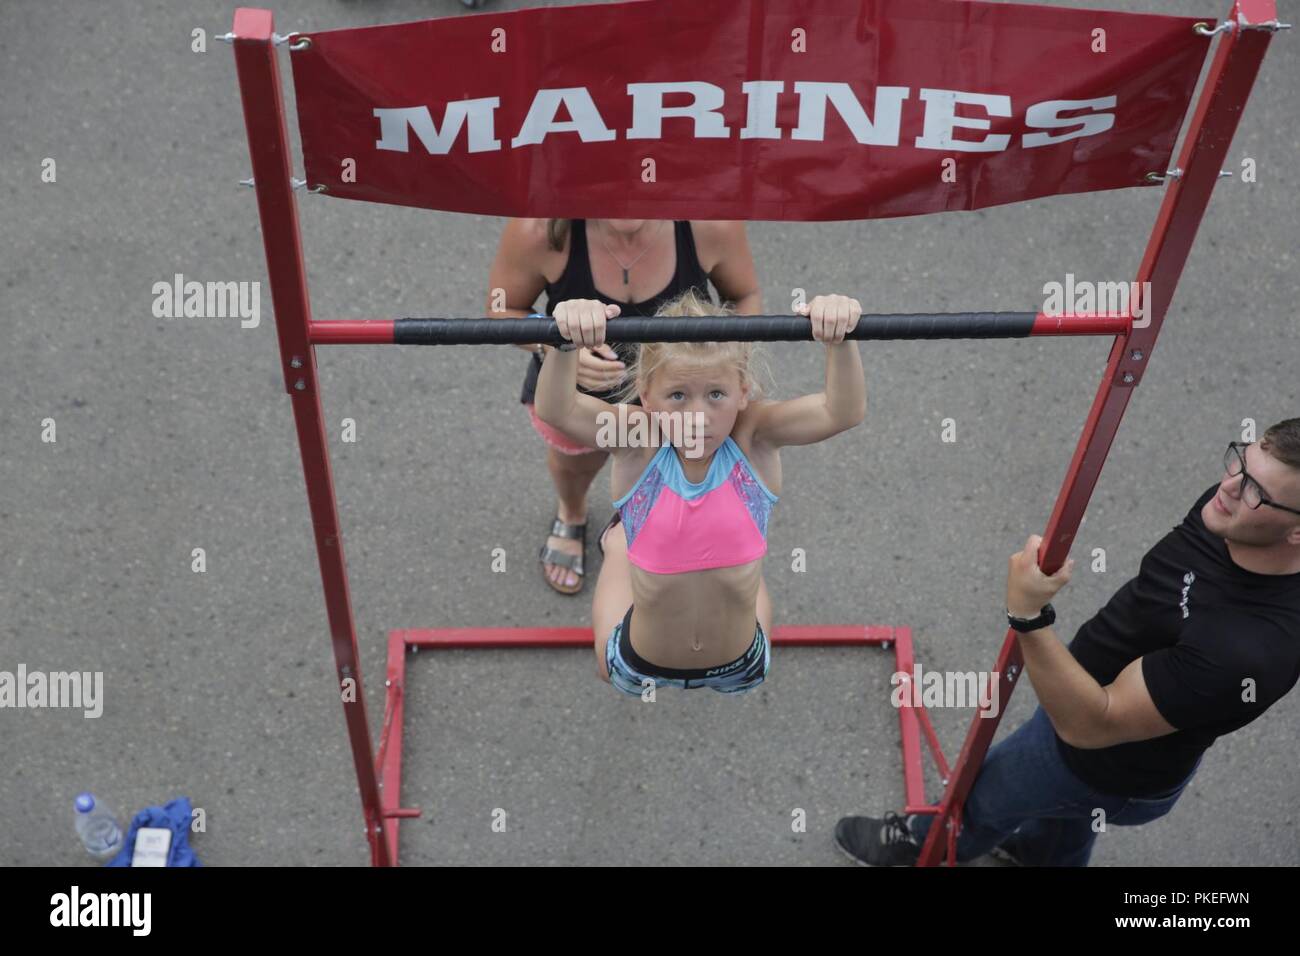 MADISON, Wisconsin – Evania Maas executes a dead hang pull-up during the 2018  Reebok CrossFit Games at the Alliant Energy Center, August 1. CrossFit  promotes both a physical exercise philosophy and competitiveness,